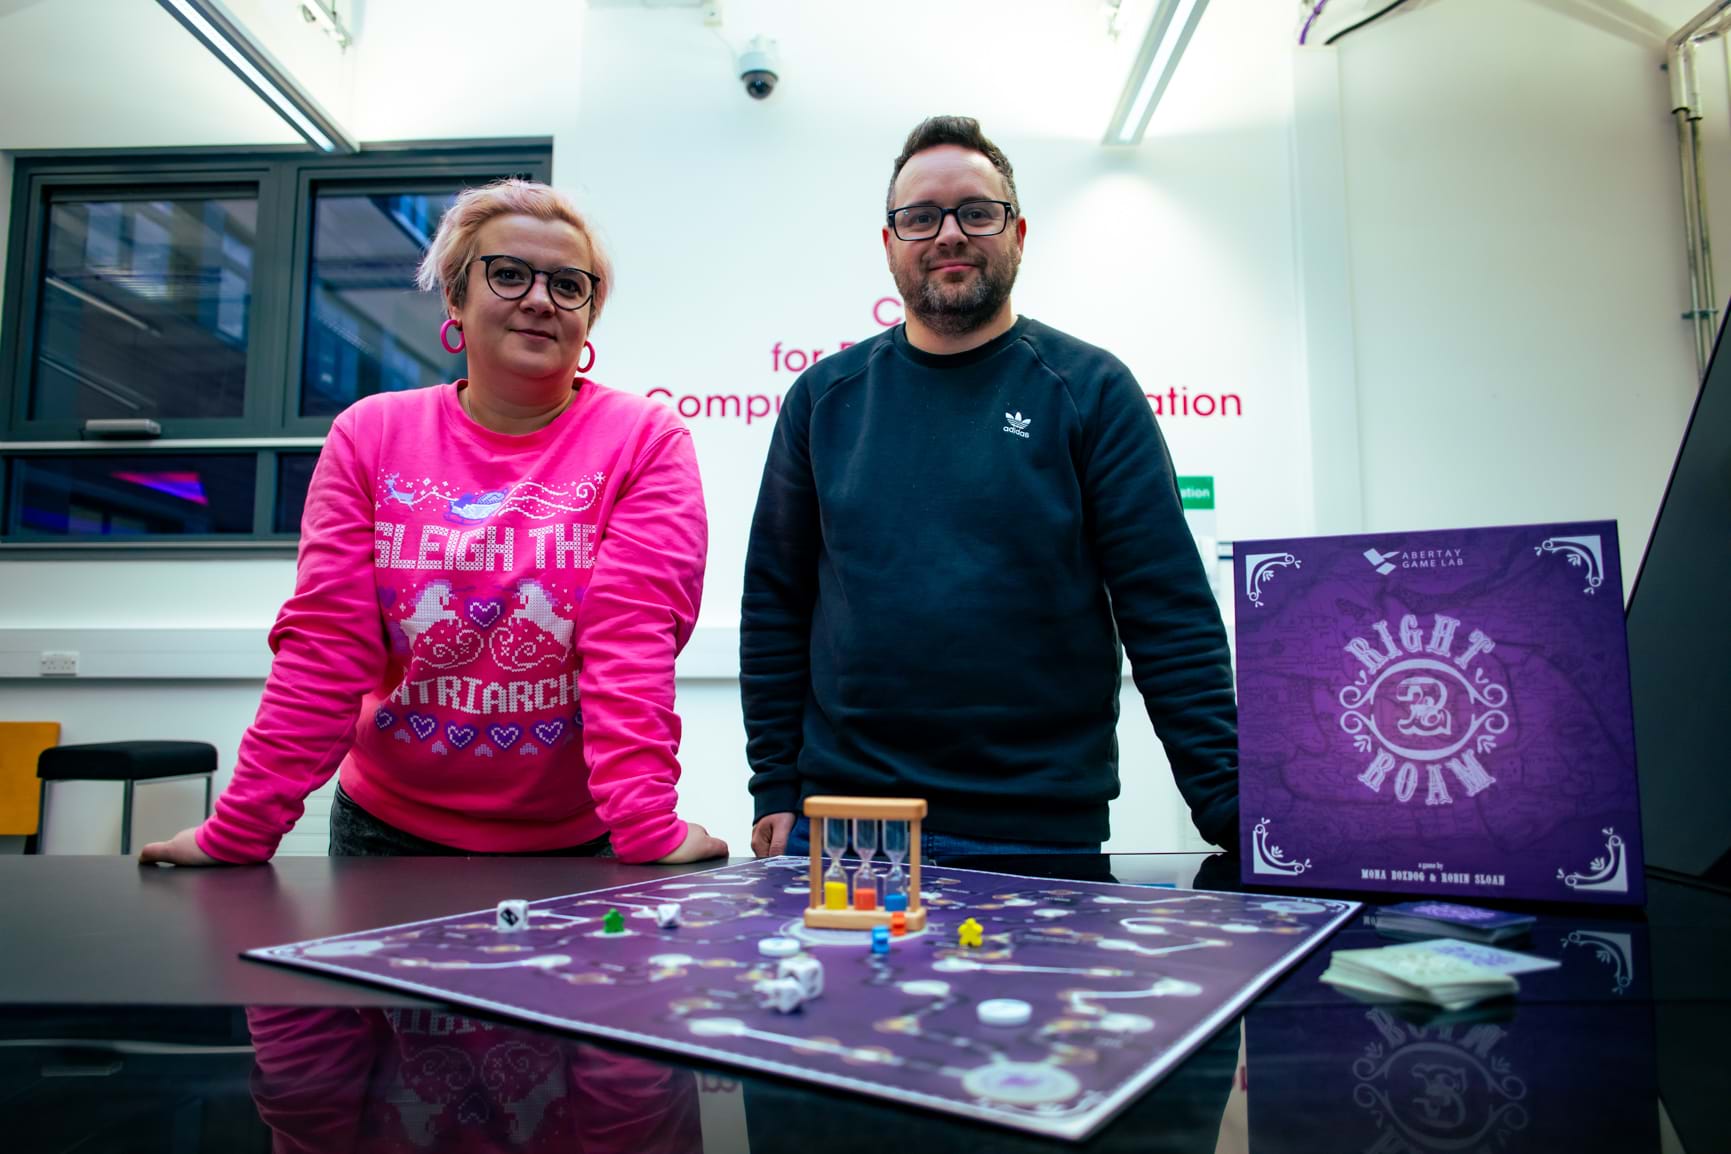 Dr Mona Bozdog wearing a pink jumper and Prof Robin Sloan wearing a blue jumper standing beside the board game